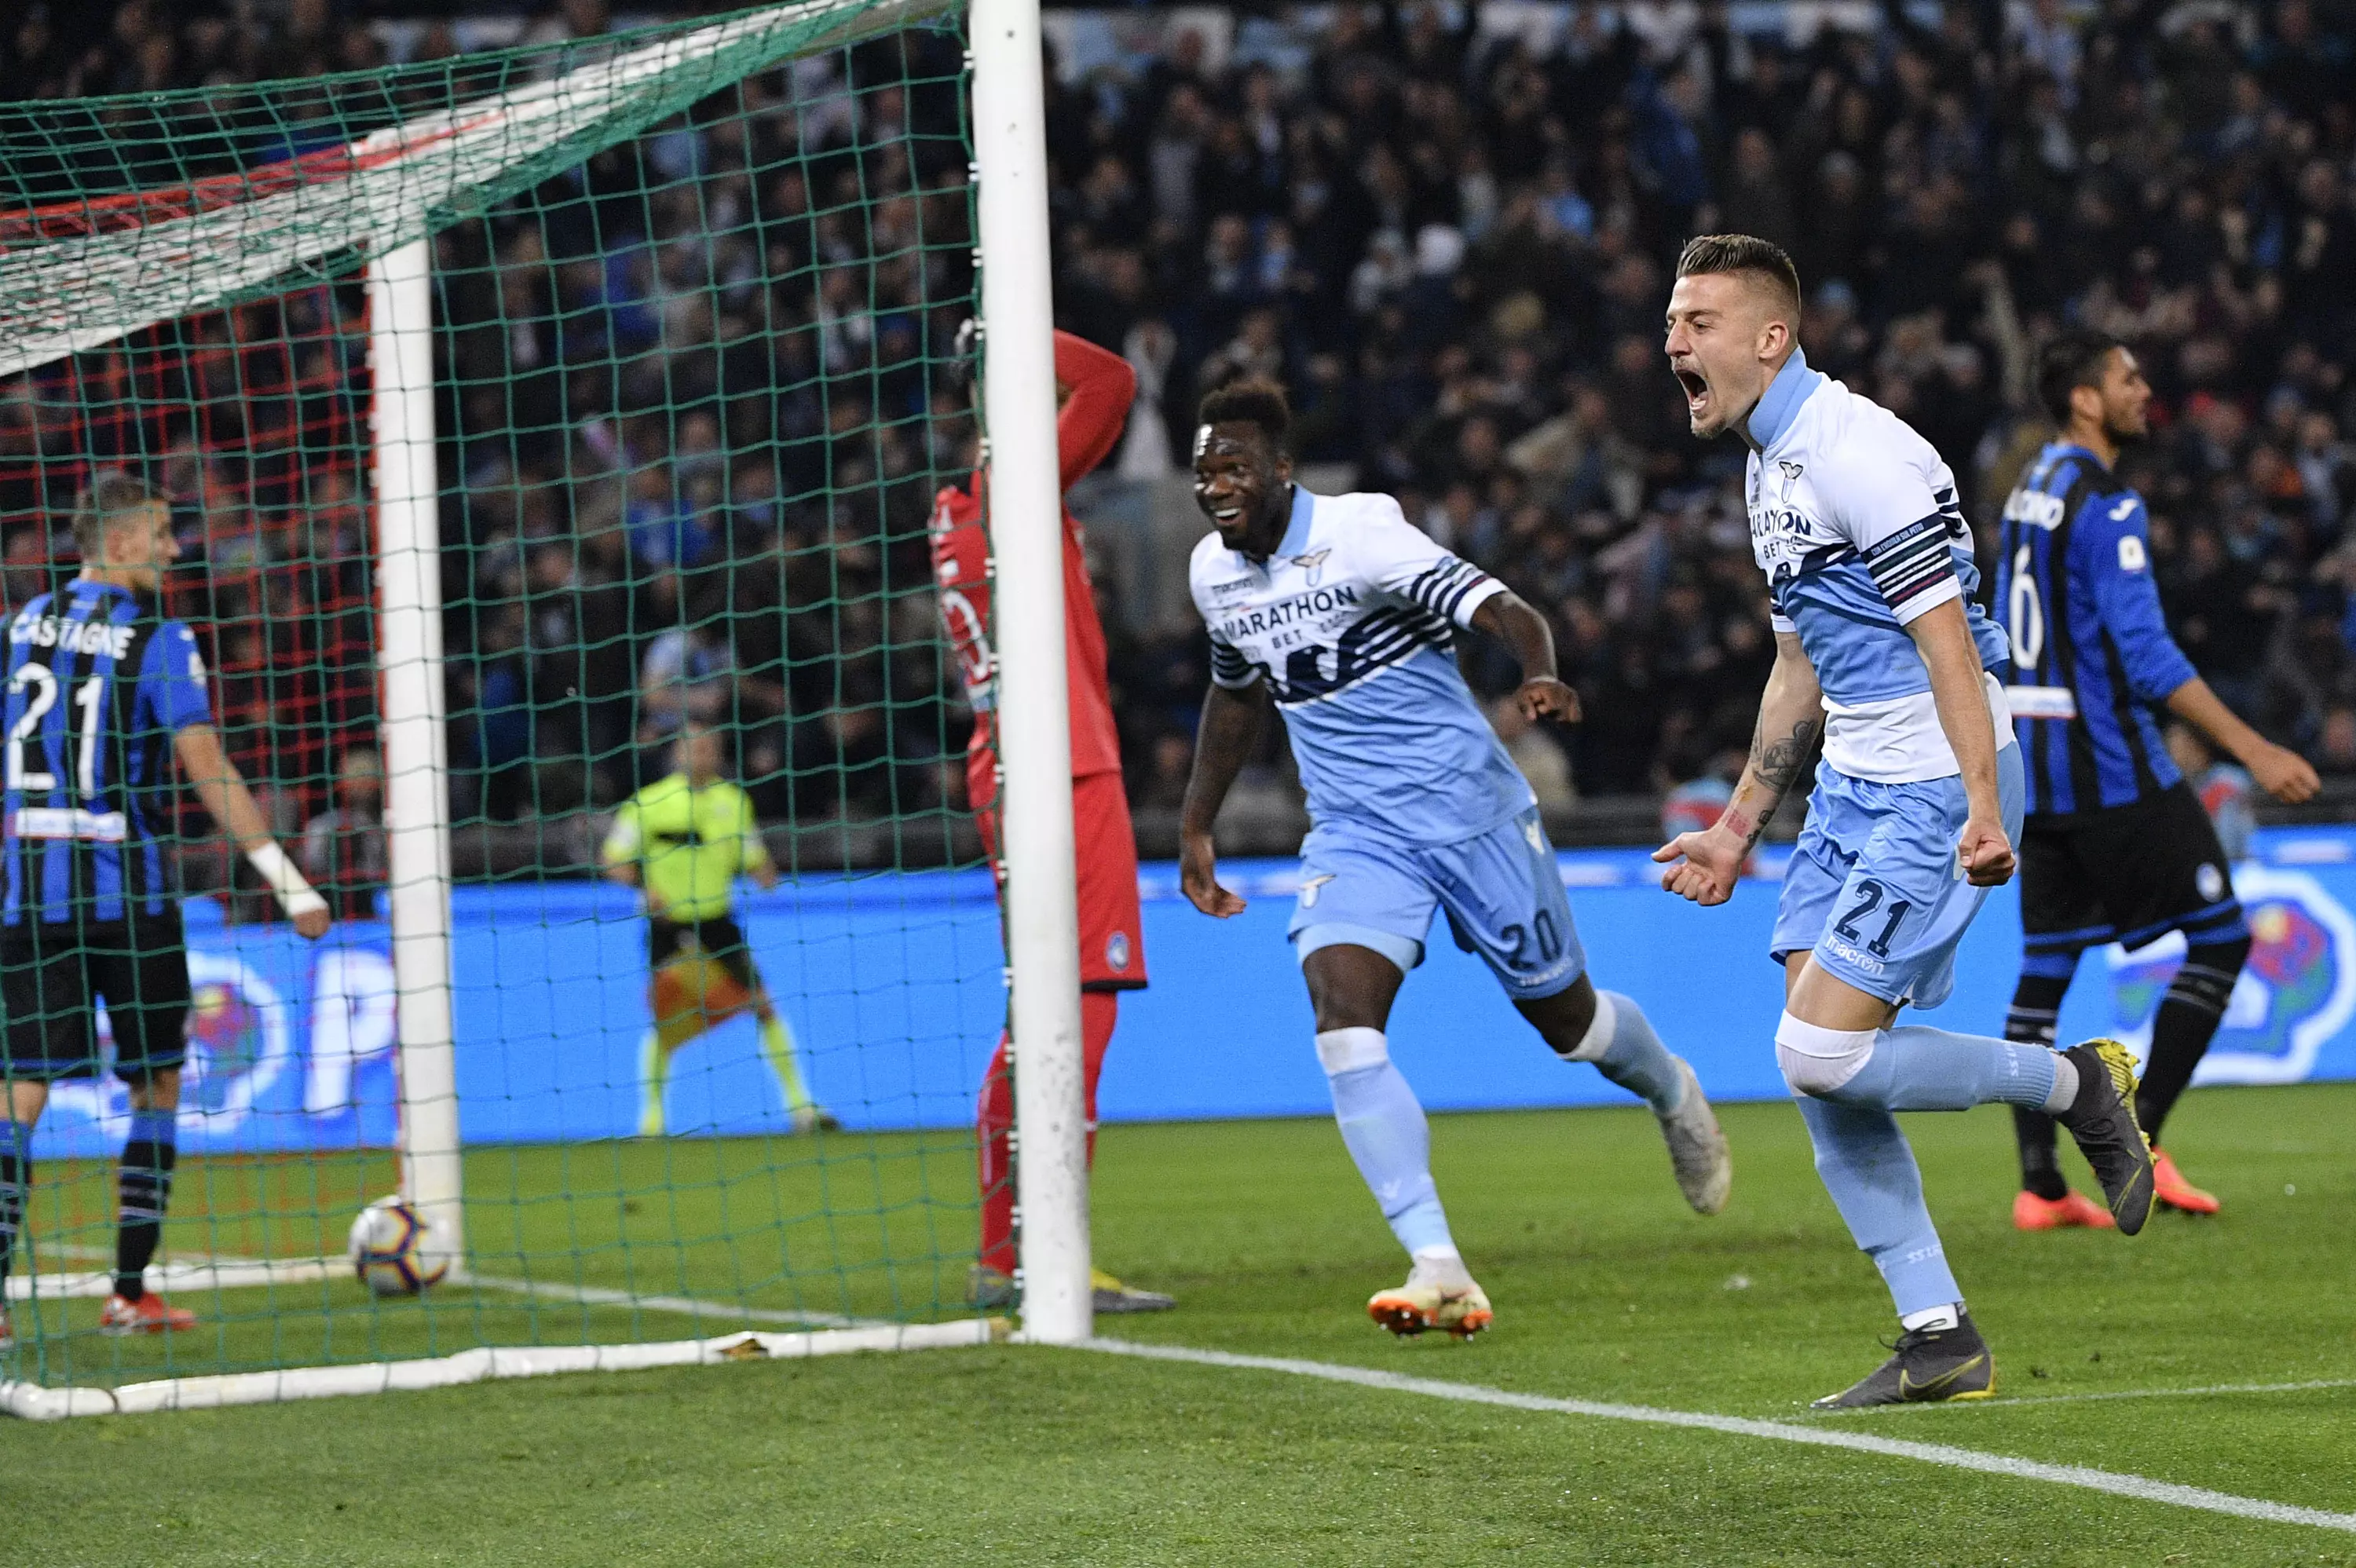 Milinkovic-Savic is one of the most highly rated midfielders in Europe. Image: PA